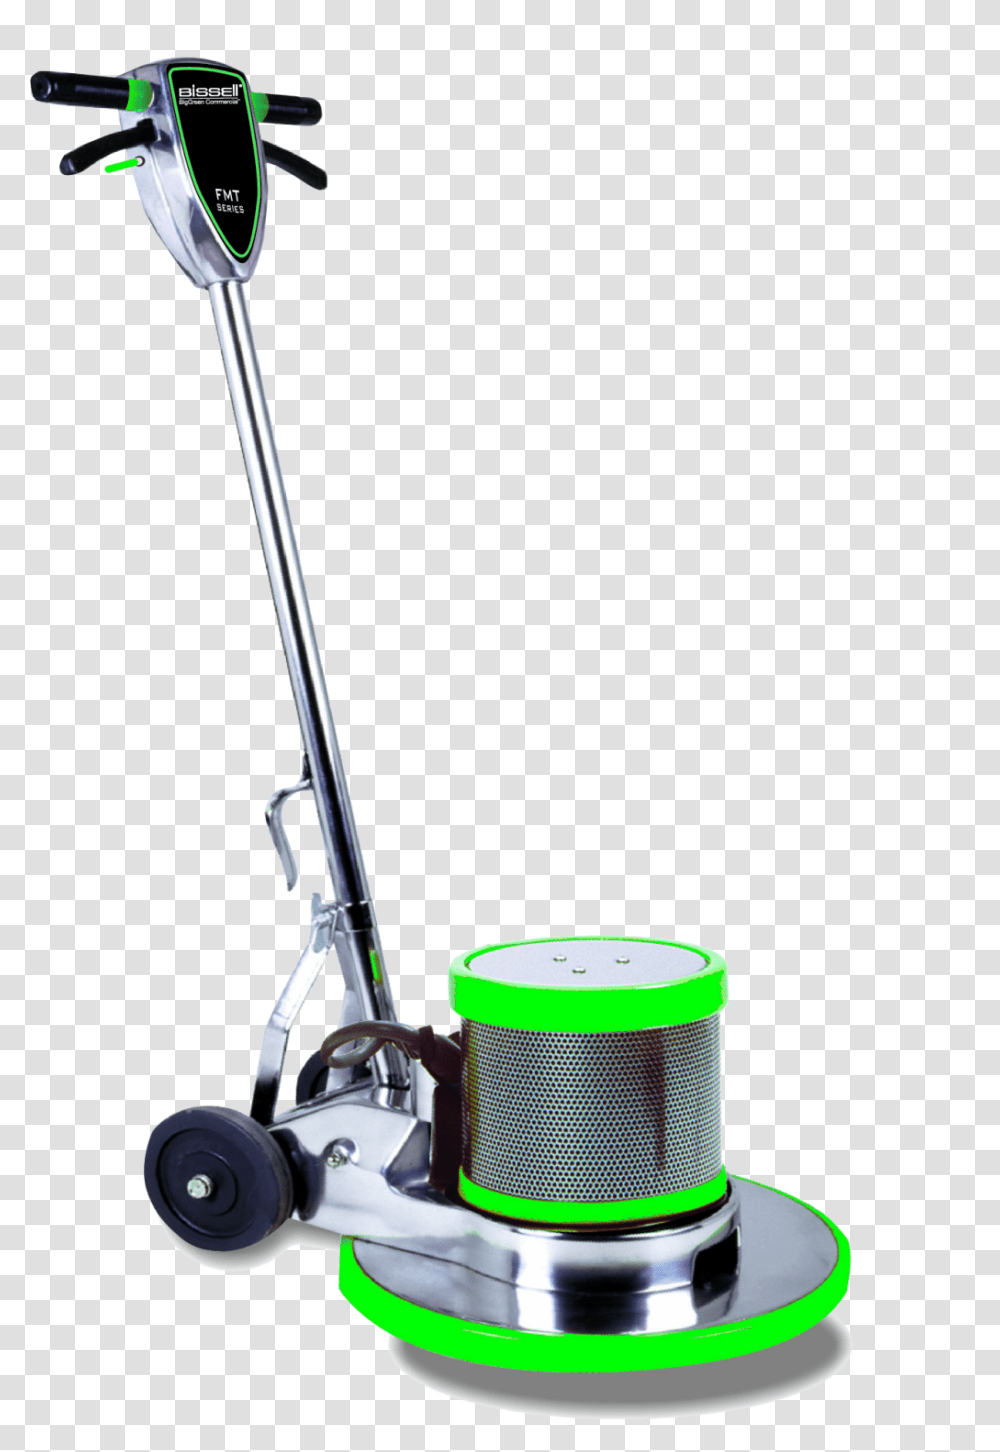 Cleaning Machine Cleaning Machine Commercial Floor Polisher, Lawn Mower, Tool, Vacuum Cleaner, Appliance Transparent Png